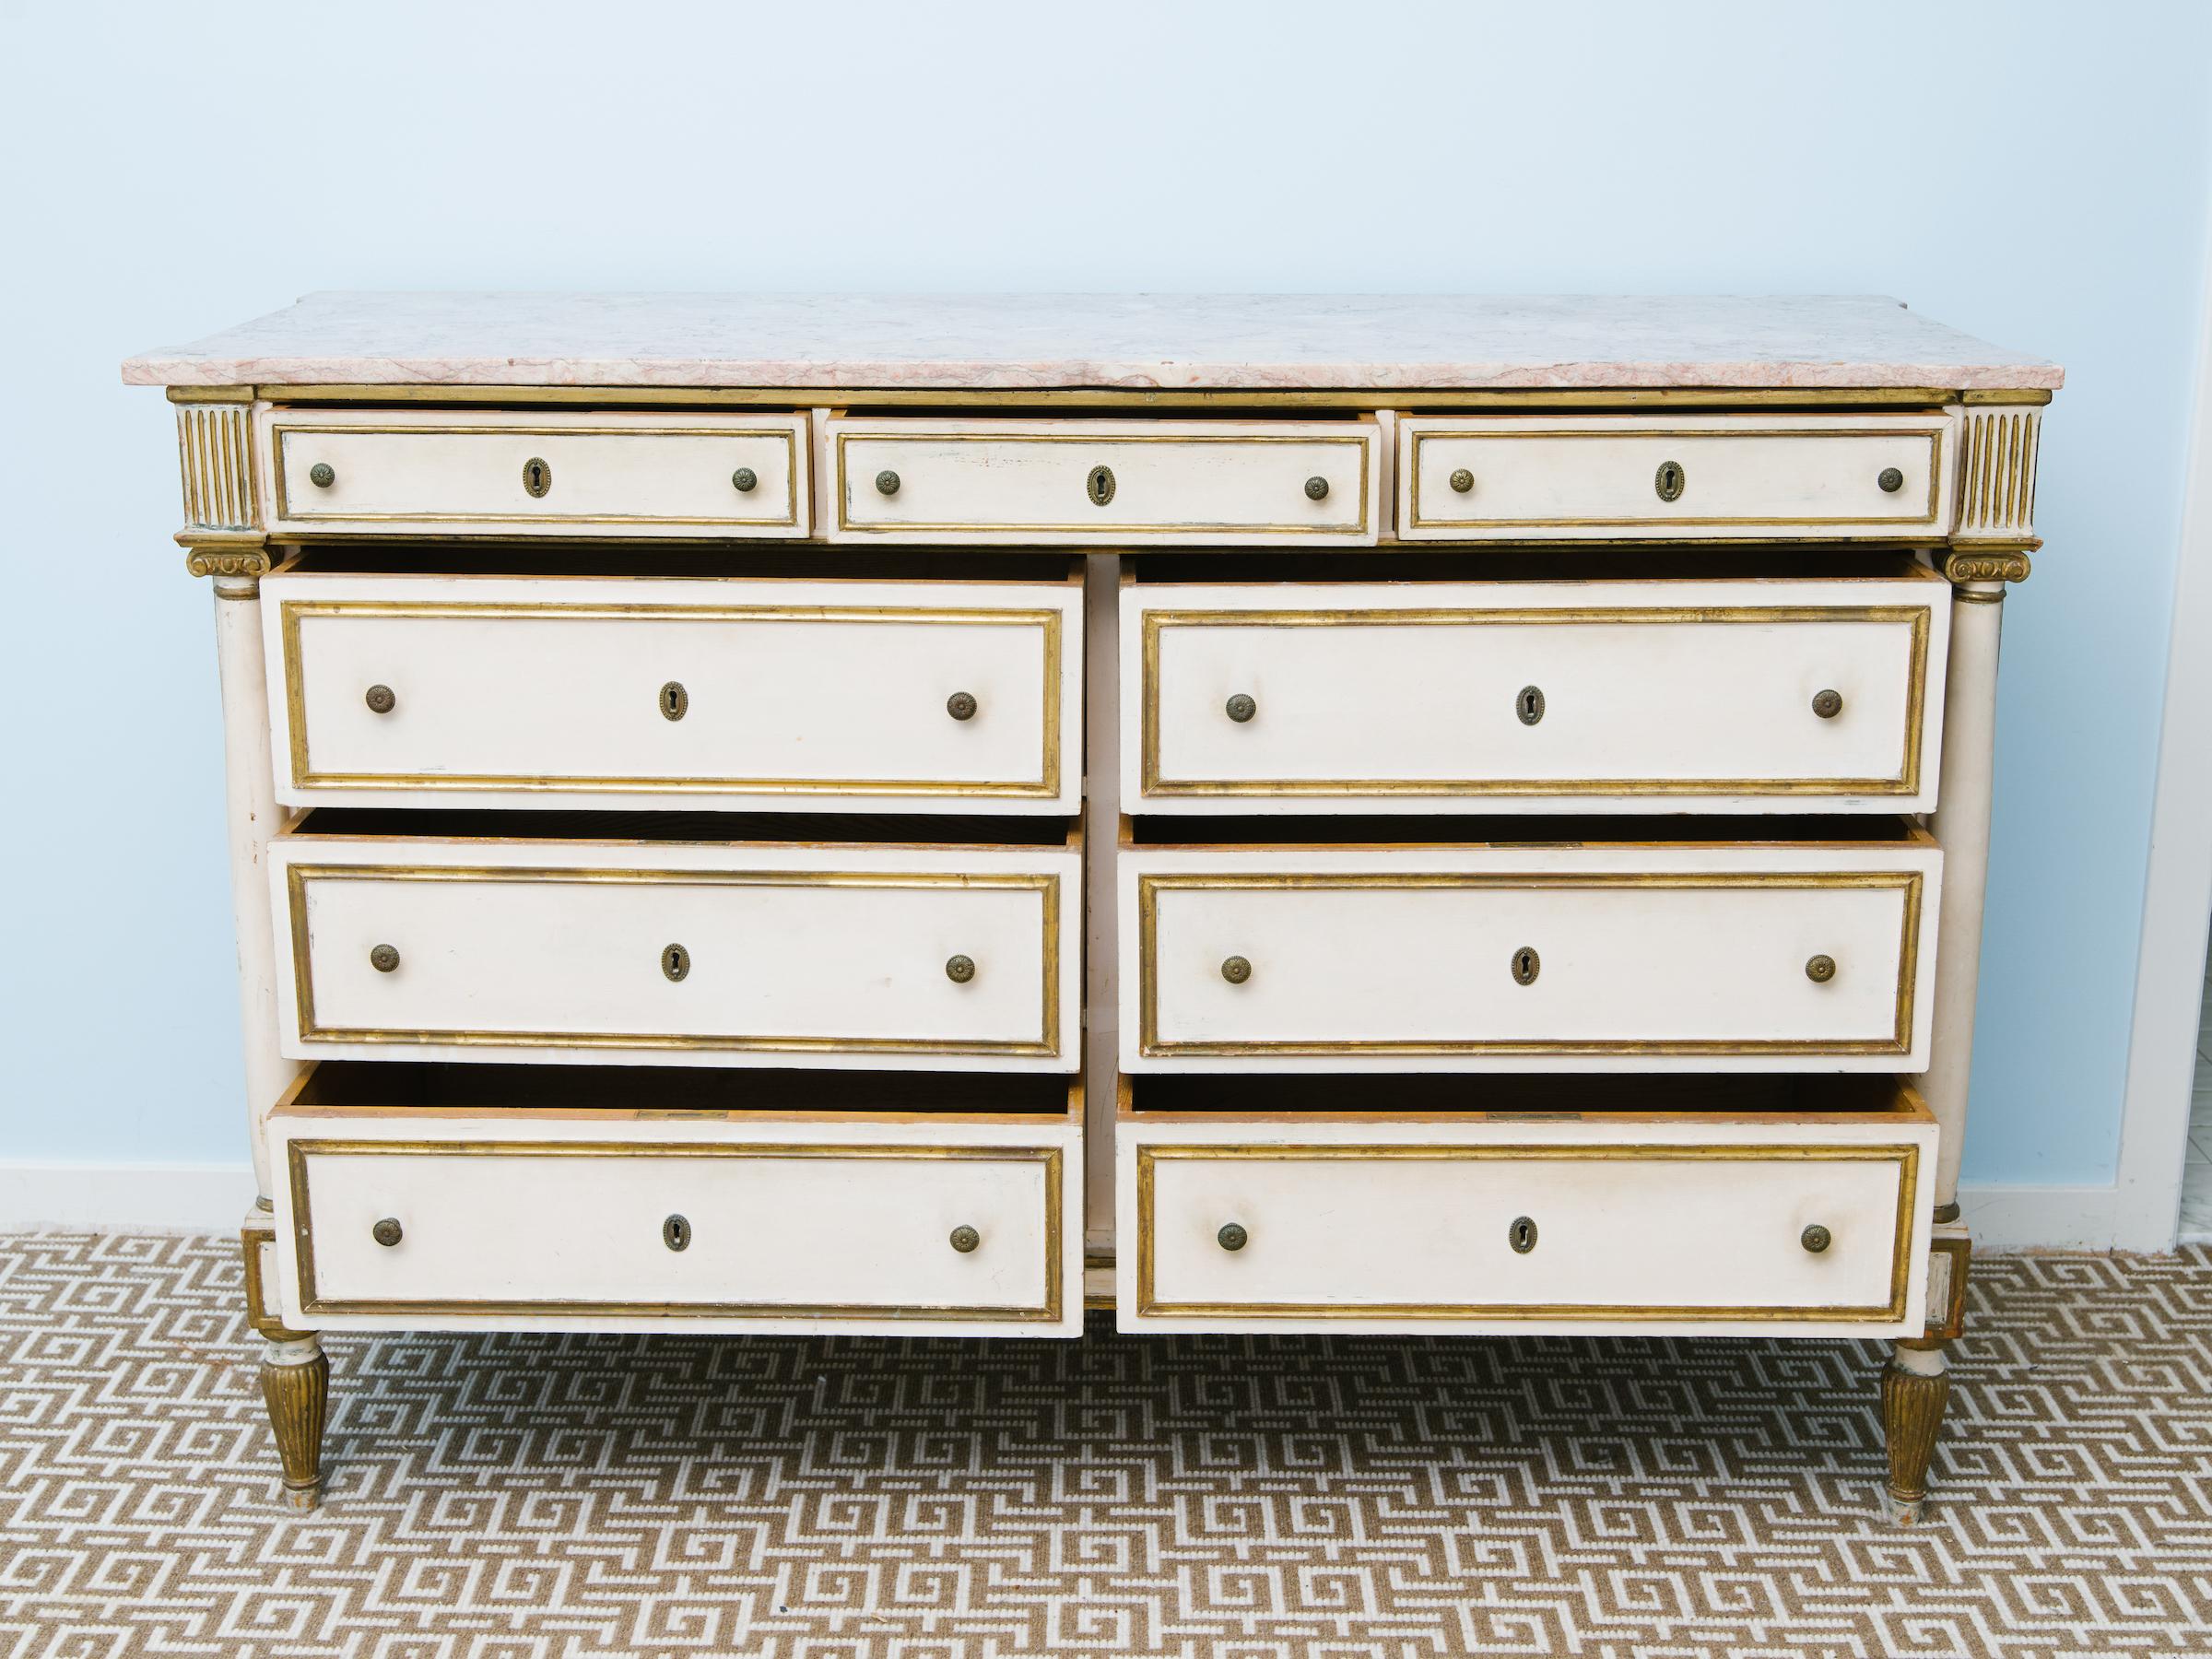 1920s French marble-top dresser with gilt accents.